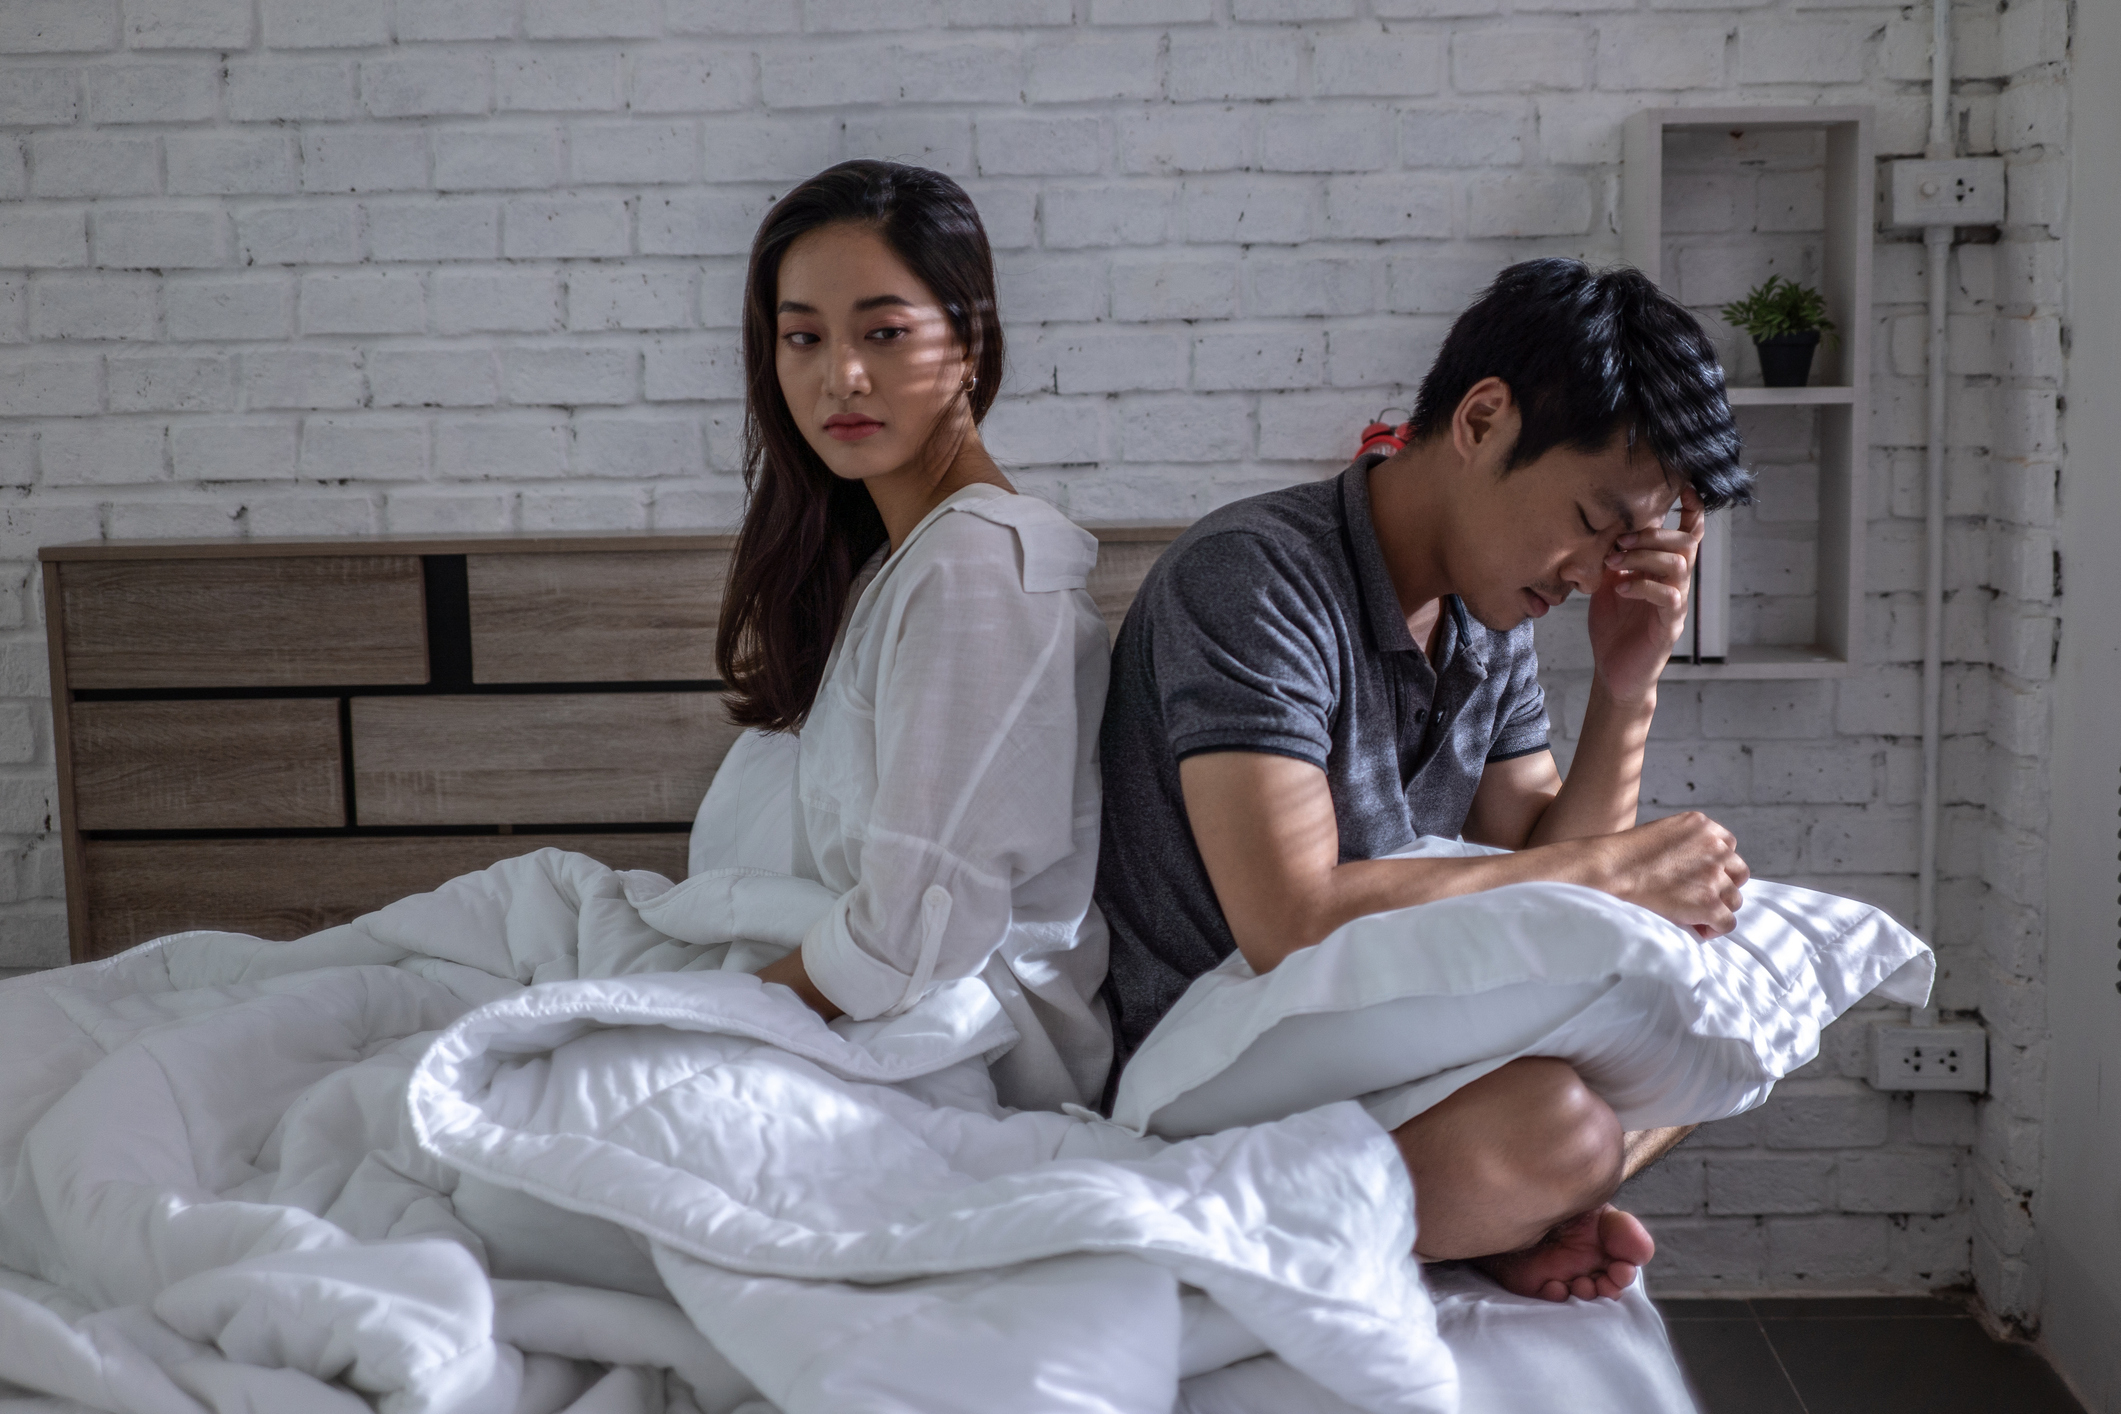 A woman and a man sit on a bed with white bedding. The woman looks away, appearing thoughtful, while the man holds his head with one hand, looking distressed